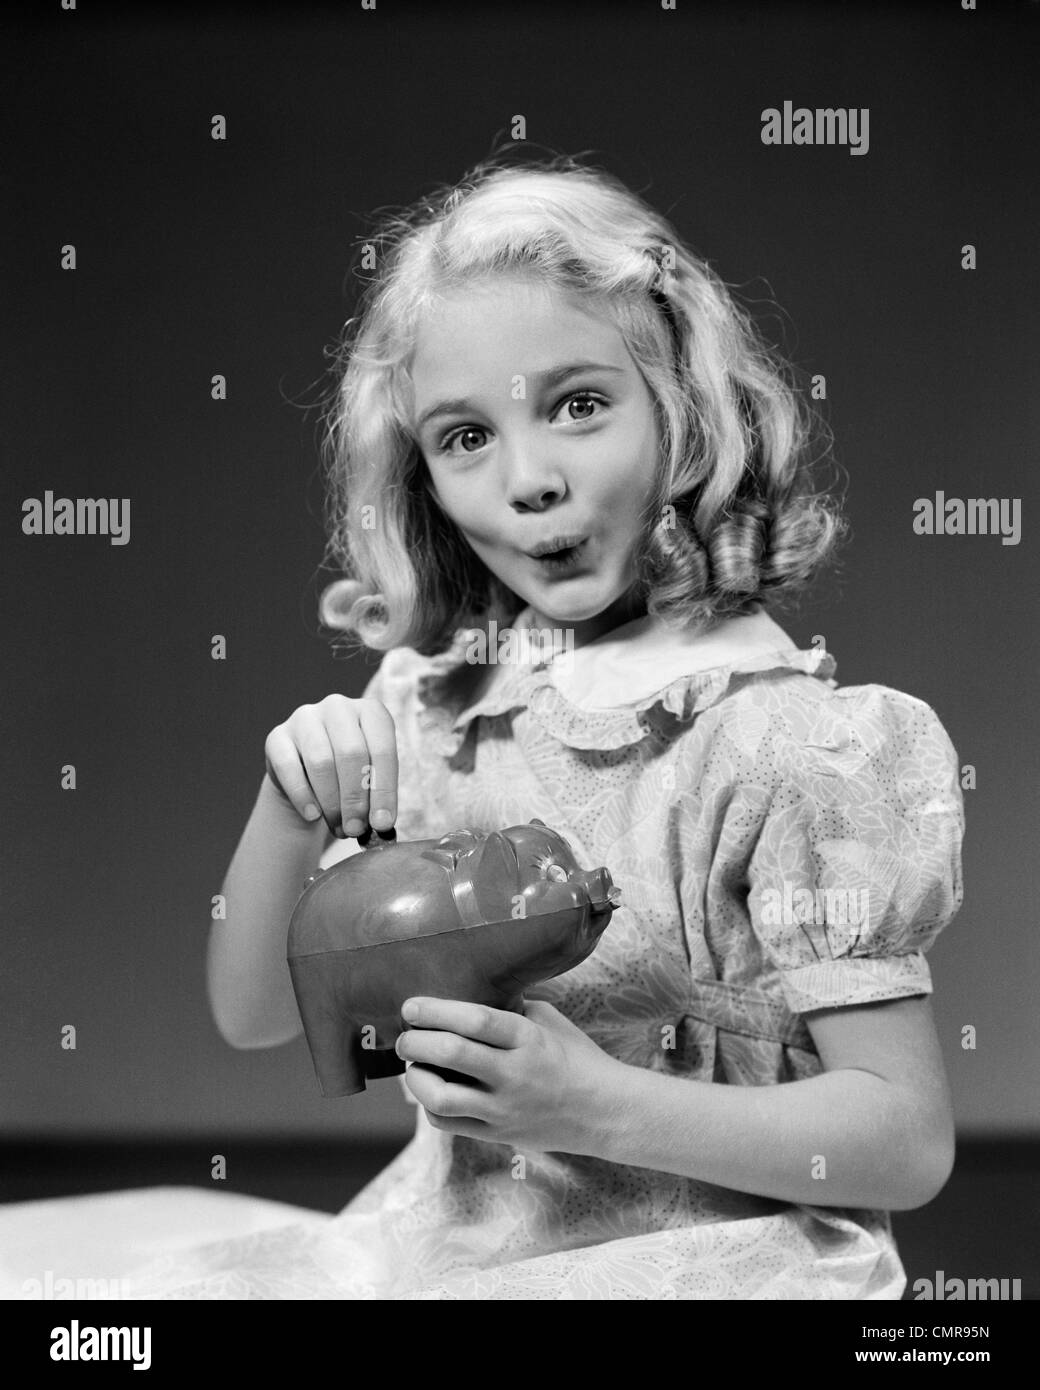 1940s CHILD BLOND GIRL PUTTING MONEY COIN INTO PIGGY BANK LOOKING AT CAMERA Stock Photo